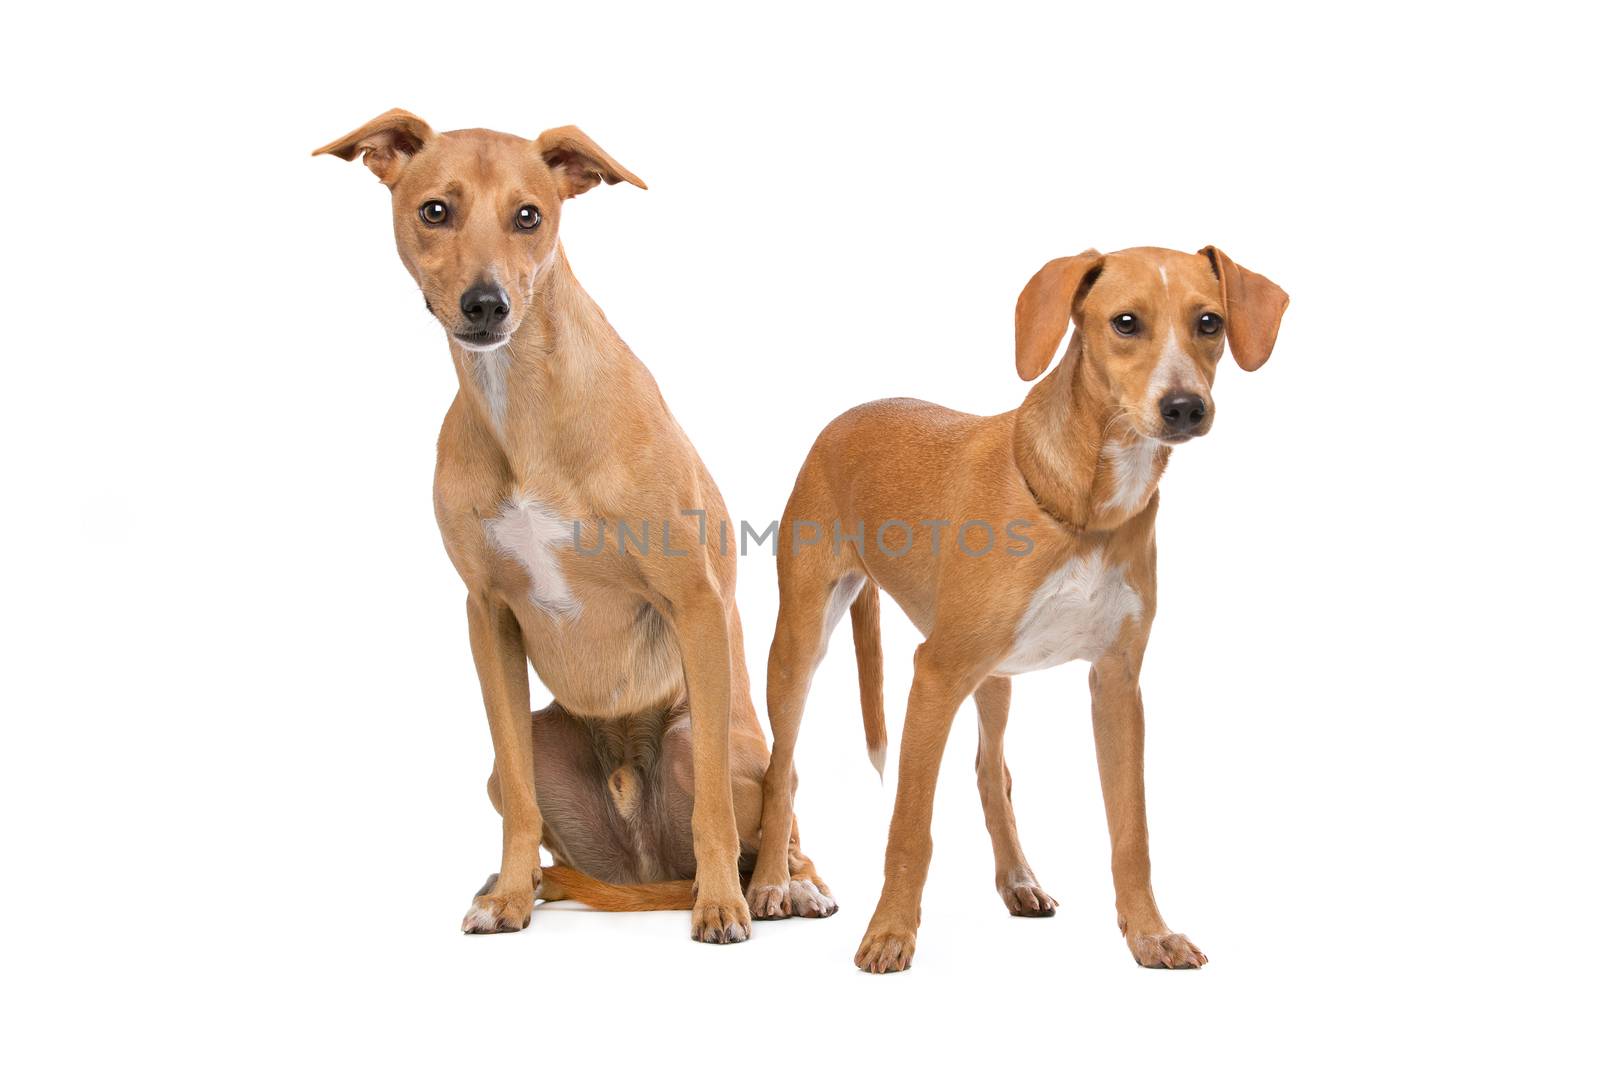 Two Podenco dogs sitting and standing in front of a white background